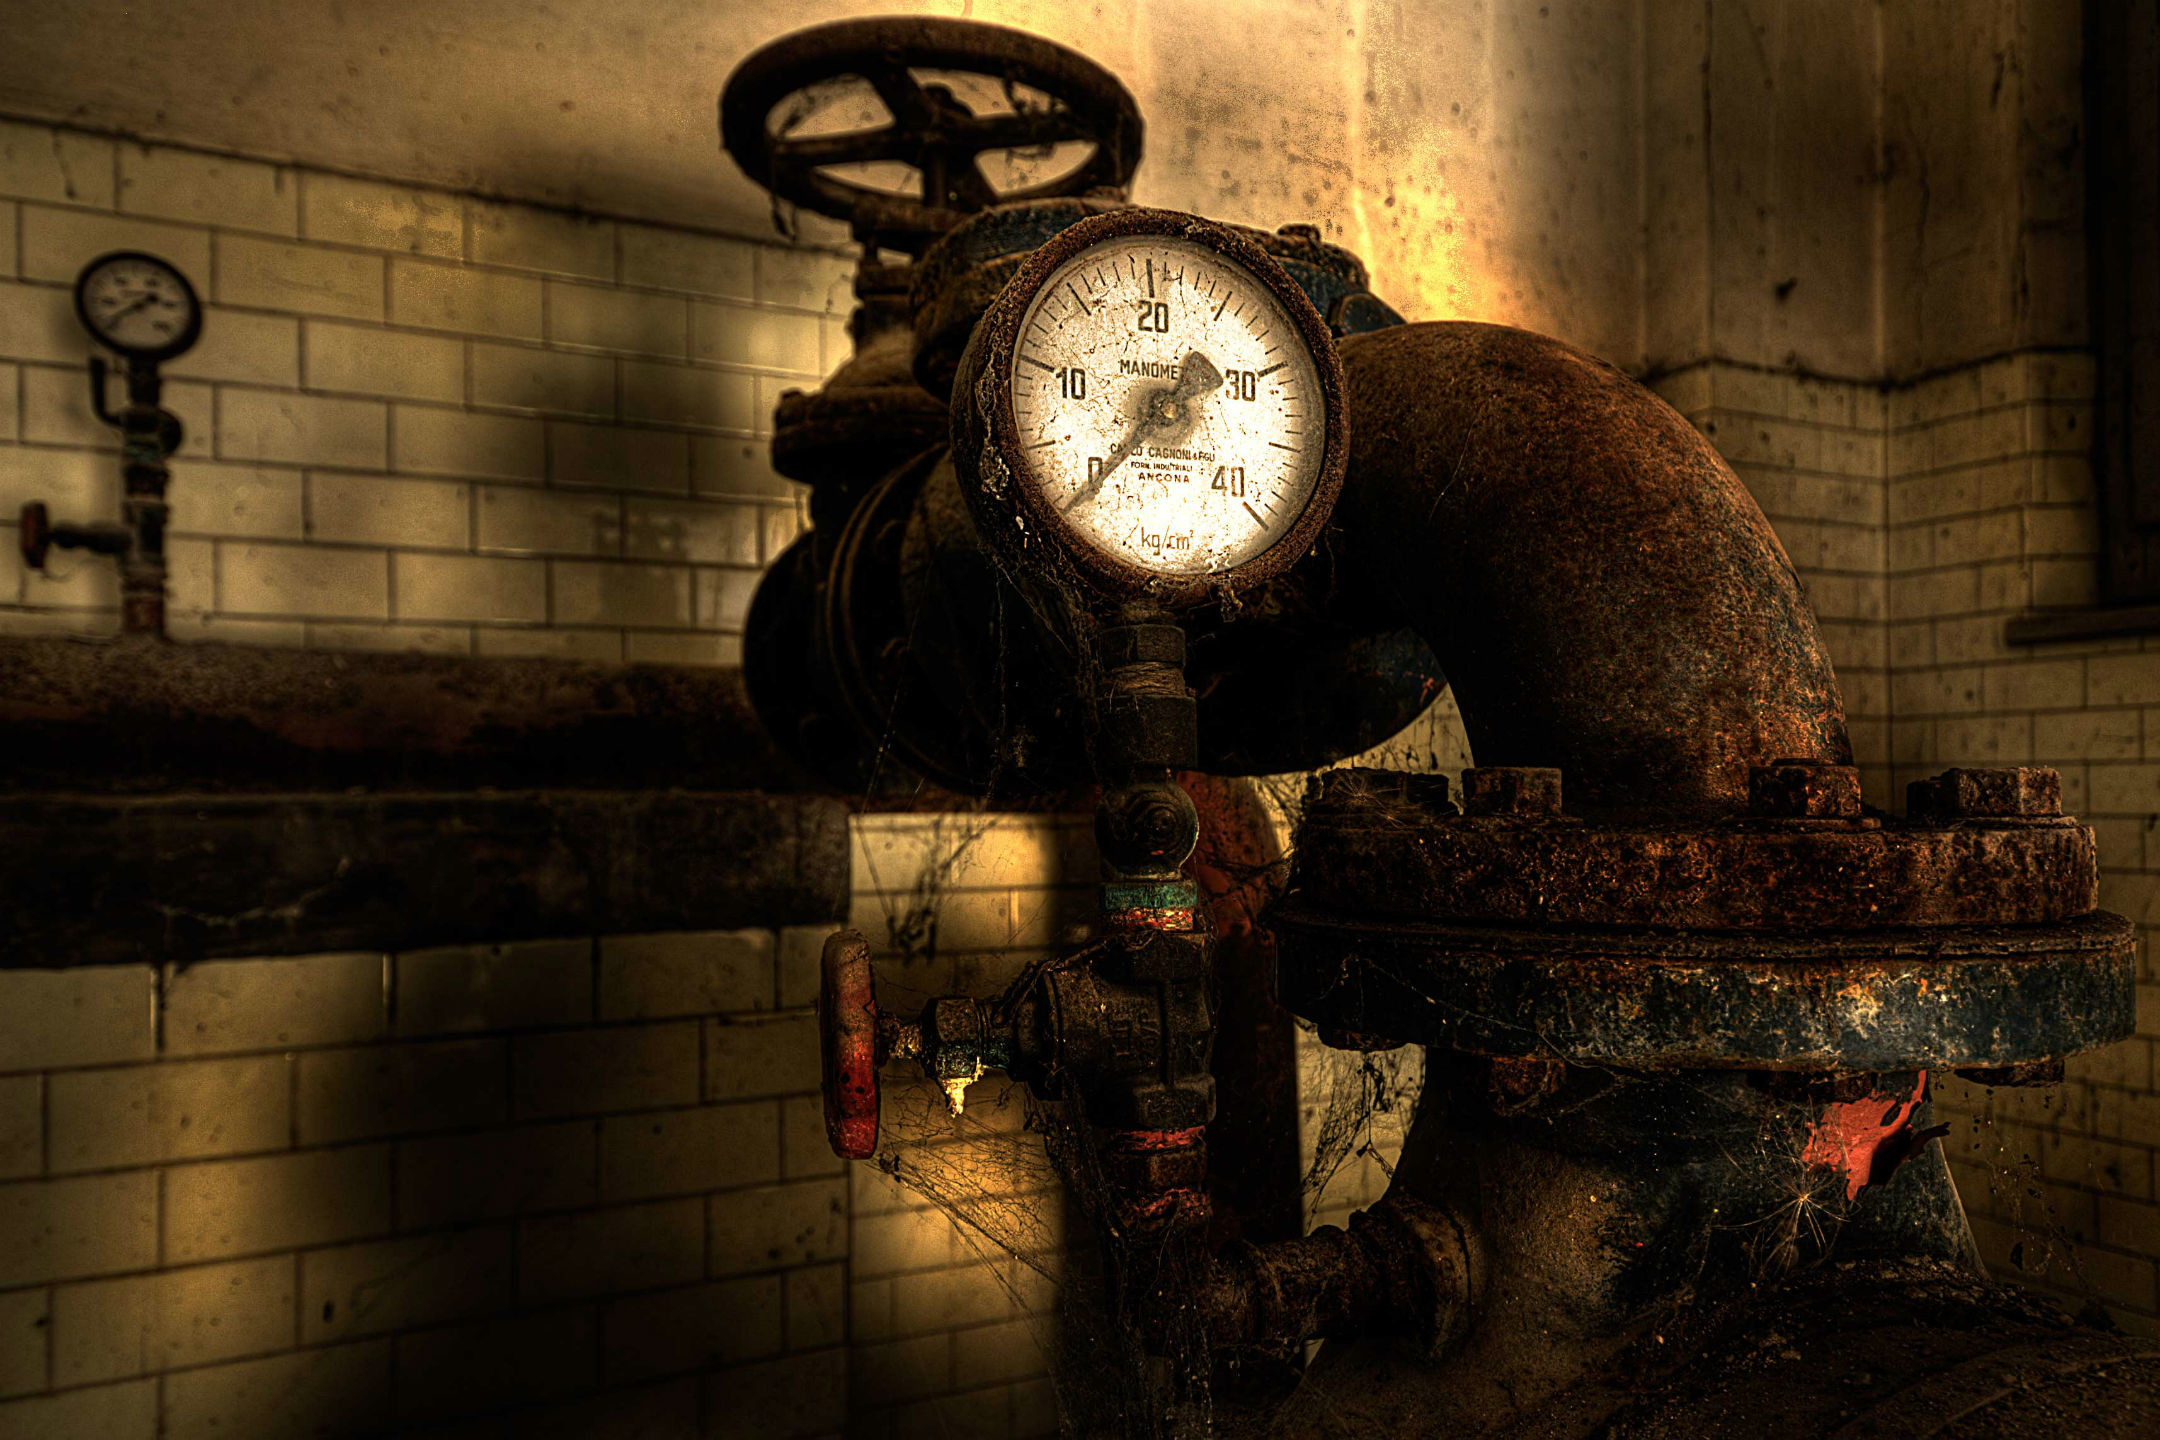 Other Hd Wallpaper - Rusty Pipes - HD Wallpaper 